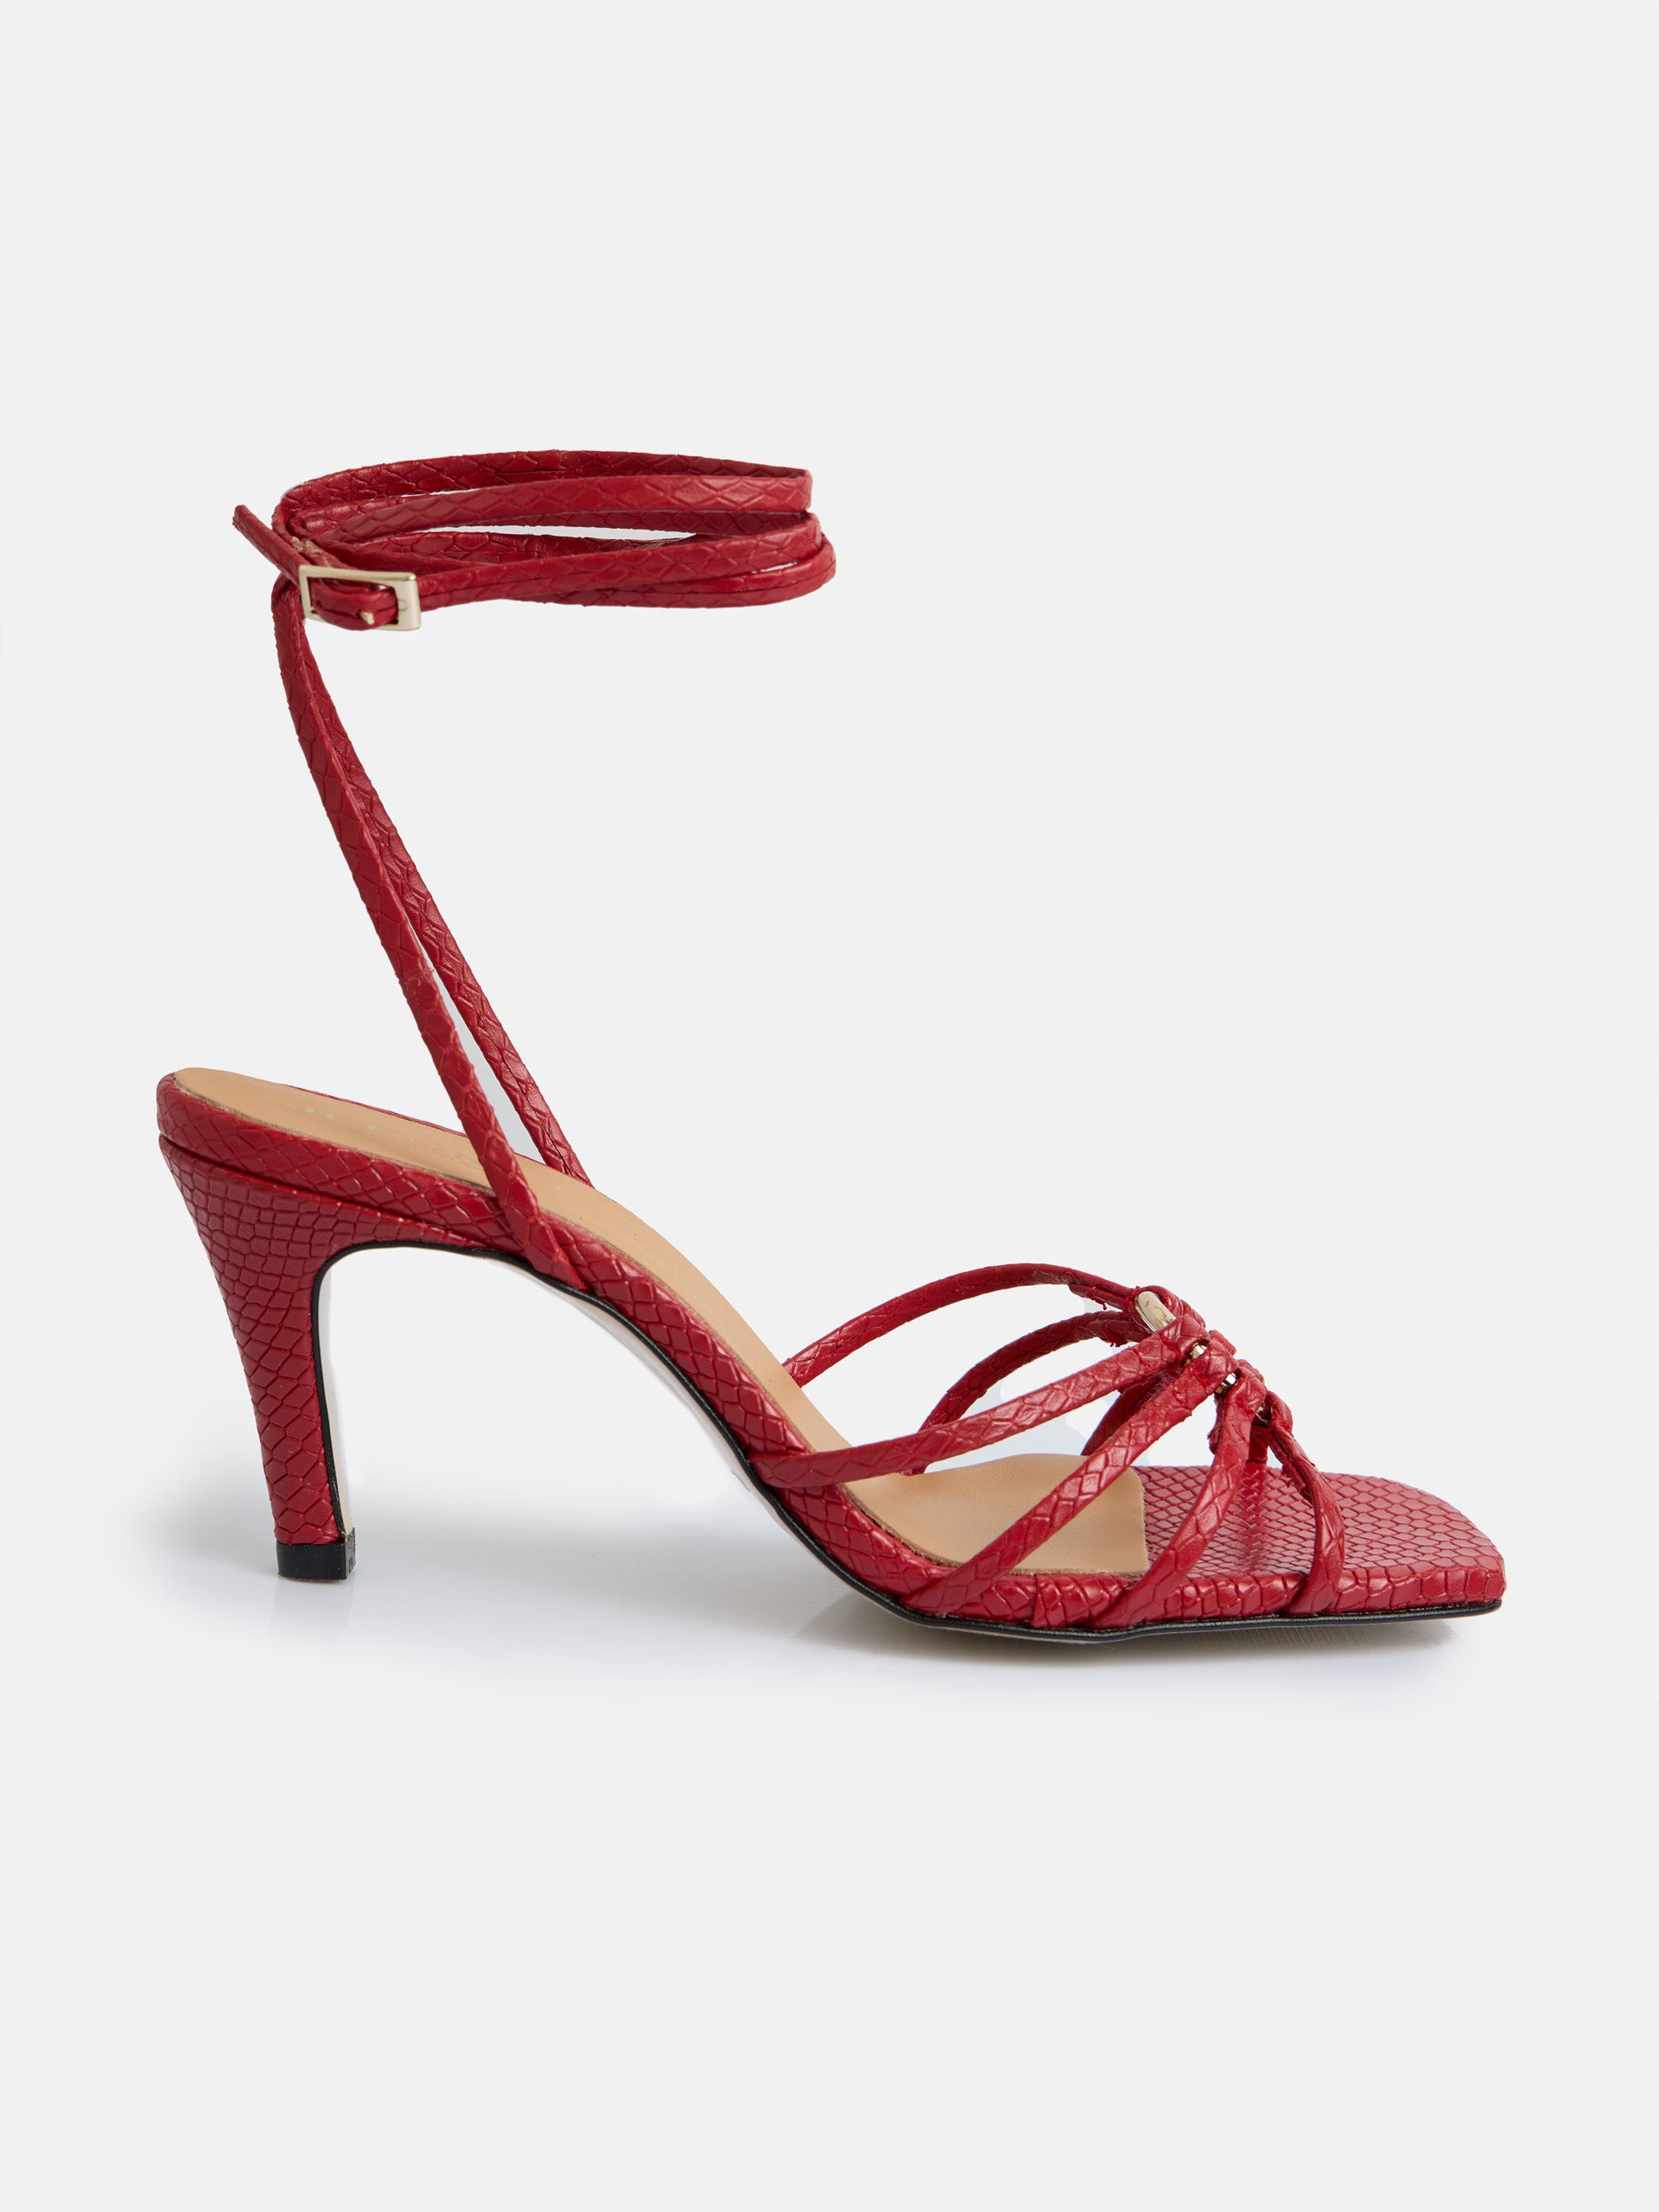 Unique woman sandal with red leather heel